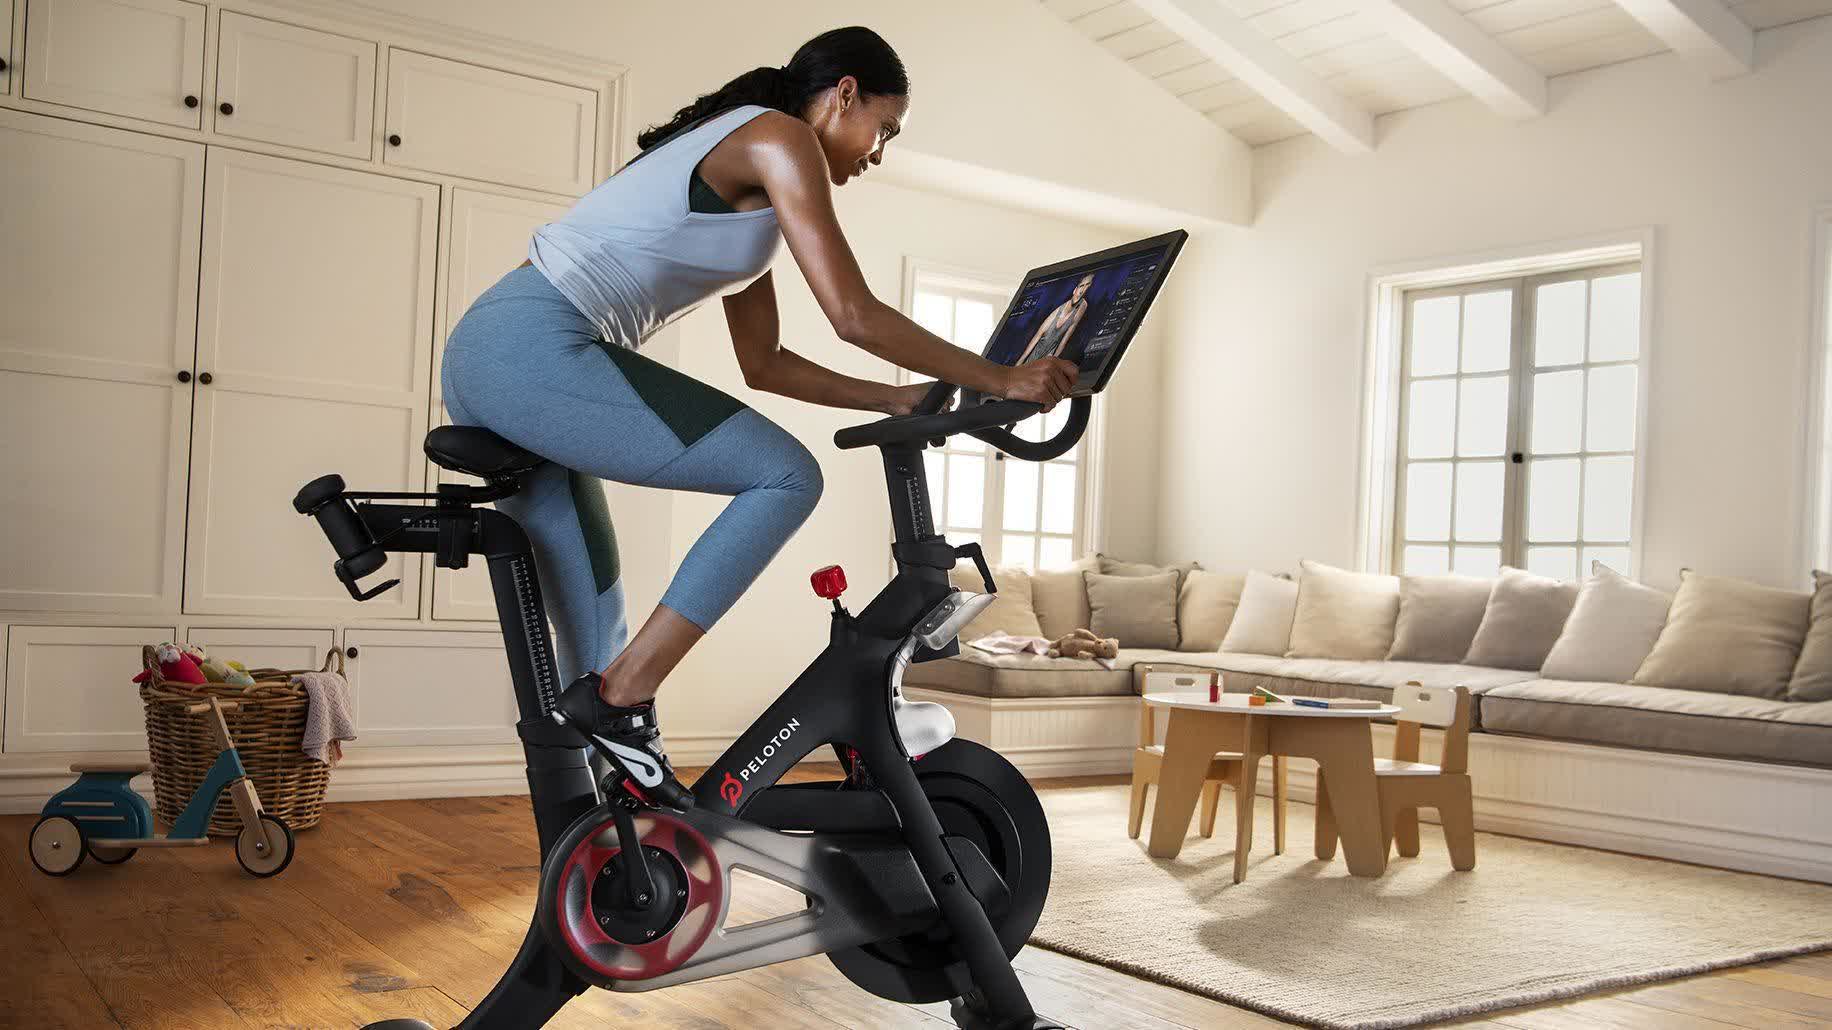 Amazon might buy Peloton and make its subscription a Prime perk